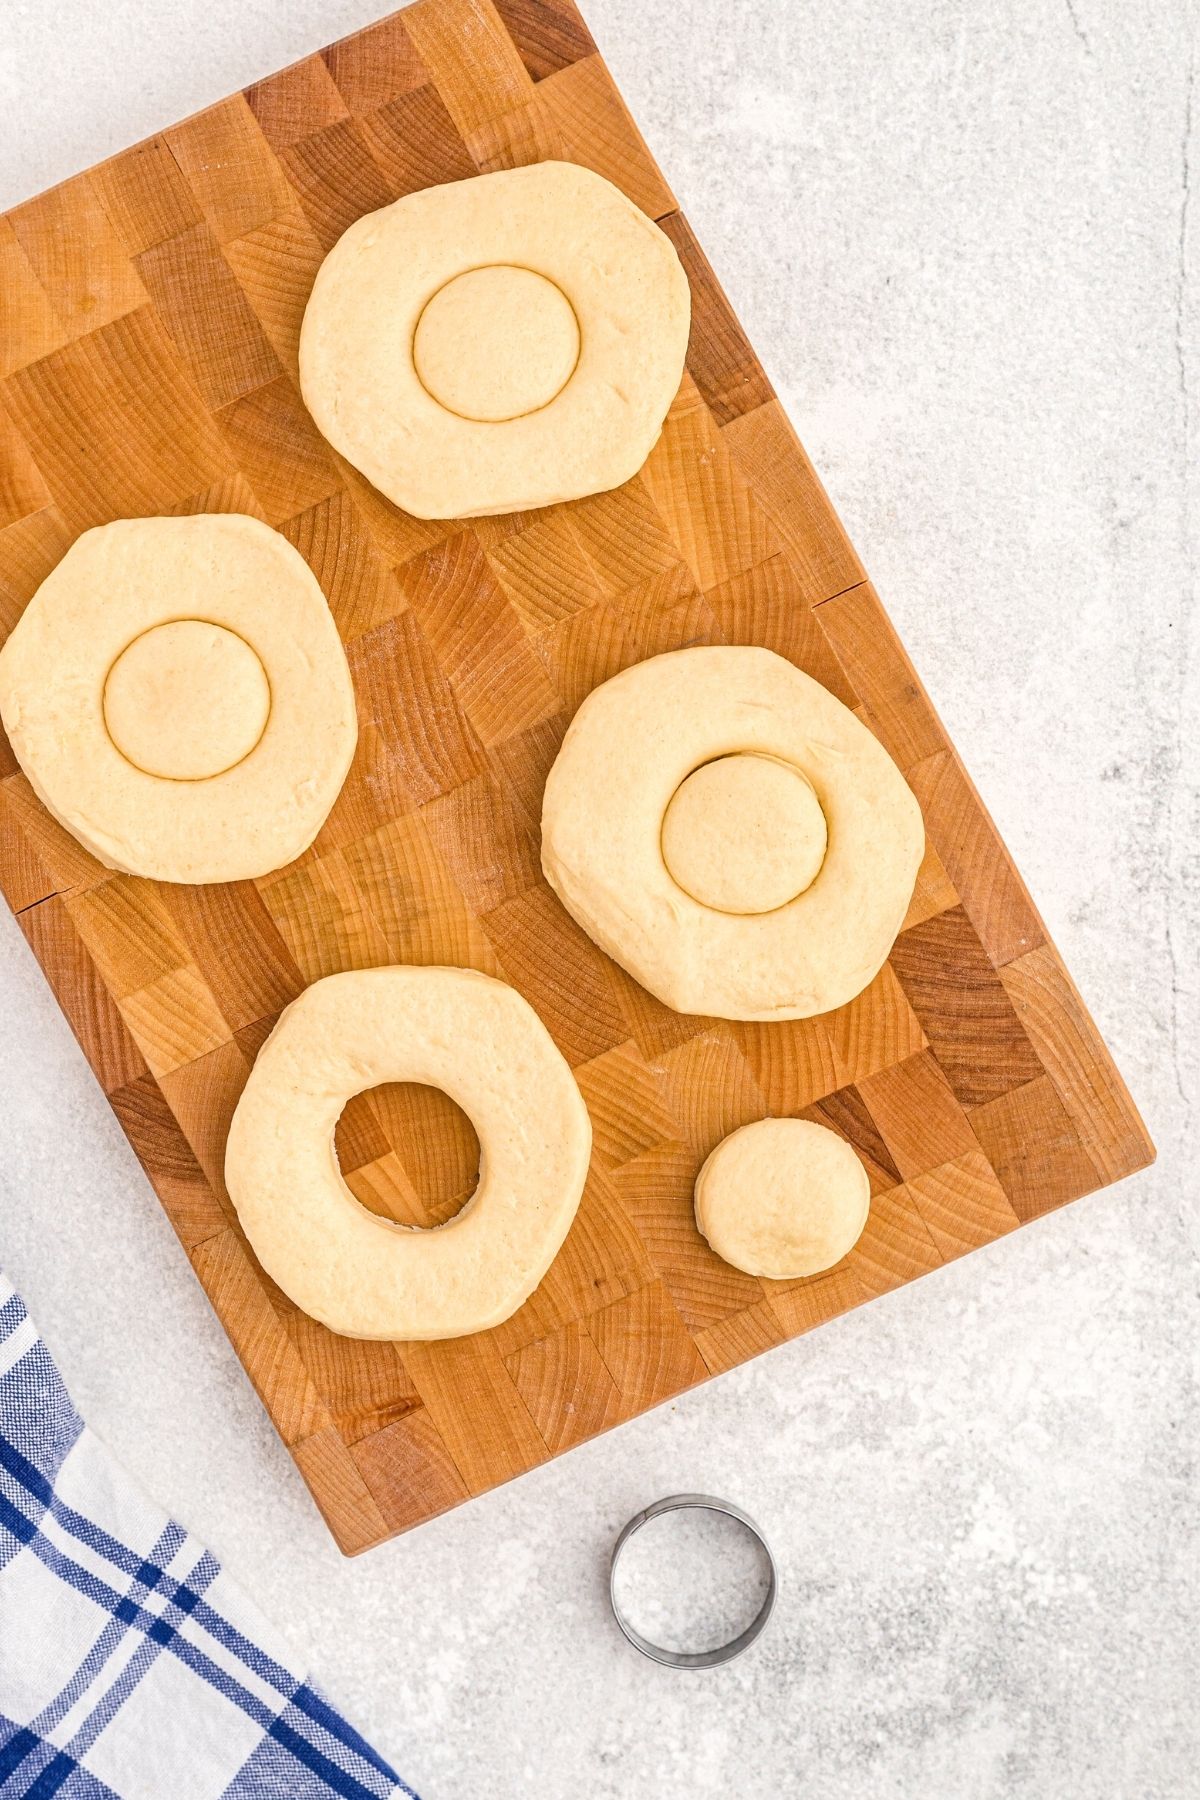 biscuits with center being cut with circles removed from centers.